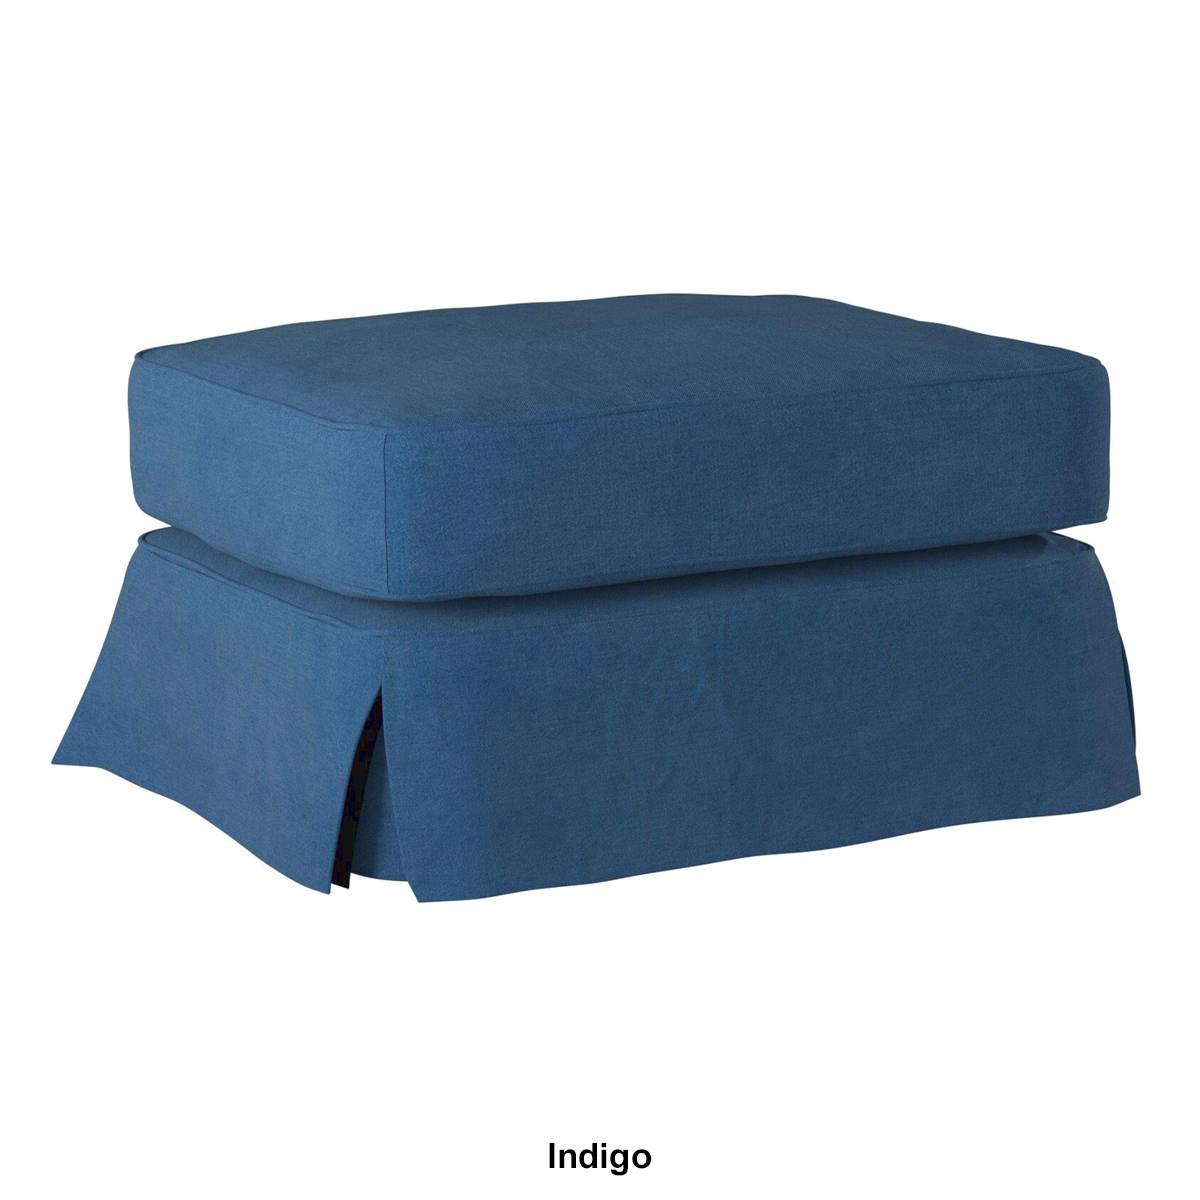 Besthom Americana Upholstered Pillow Top Ottoman